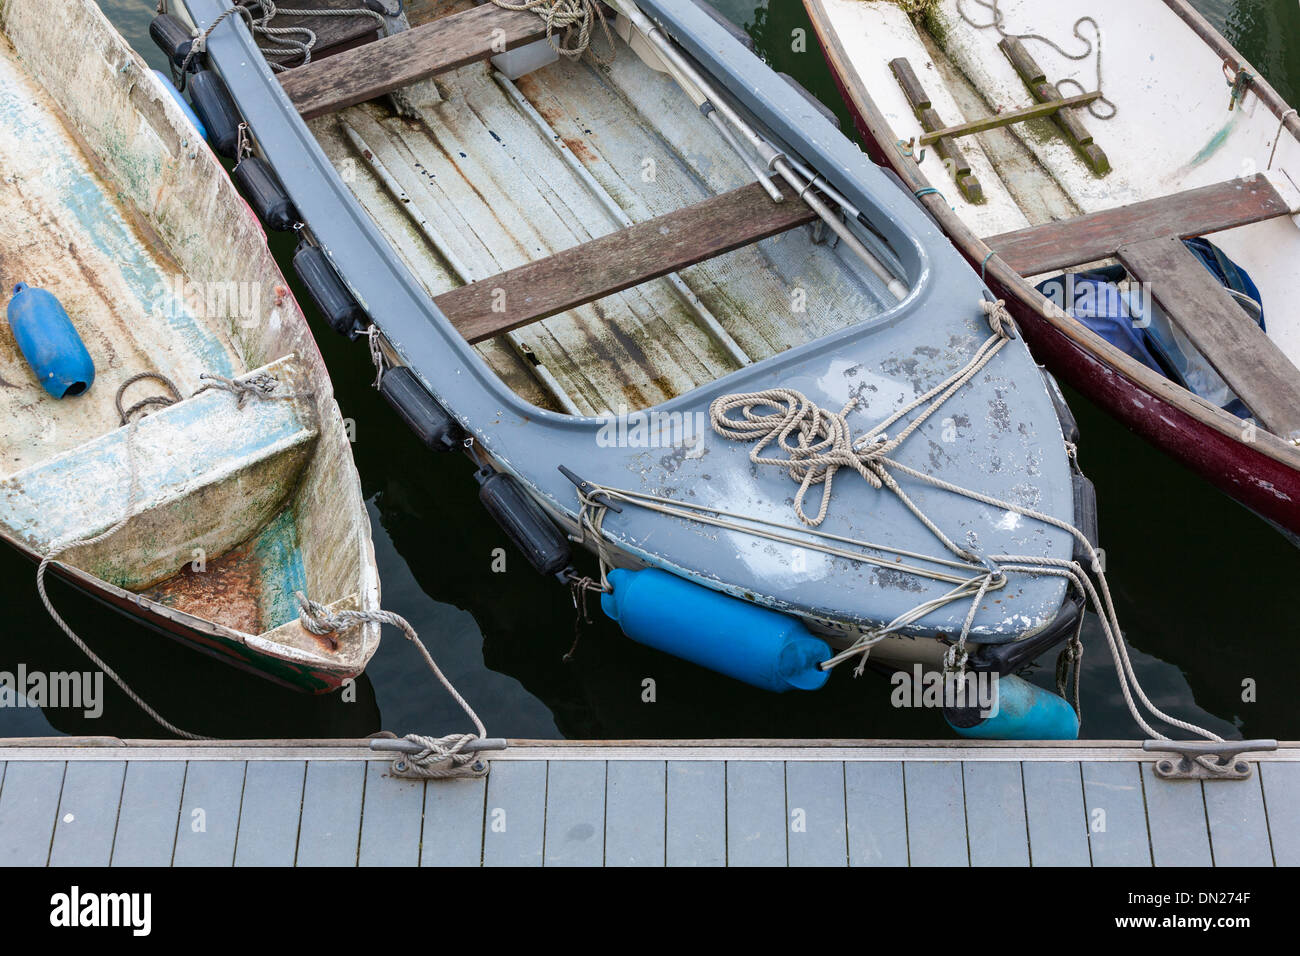 A line of old boats tied to a pontoon, viewed from above. Stock Photo